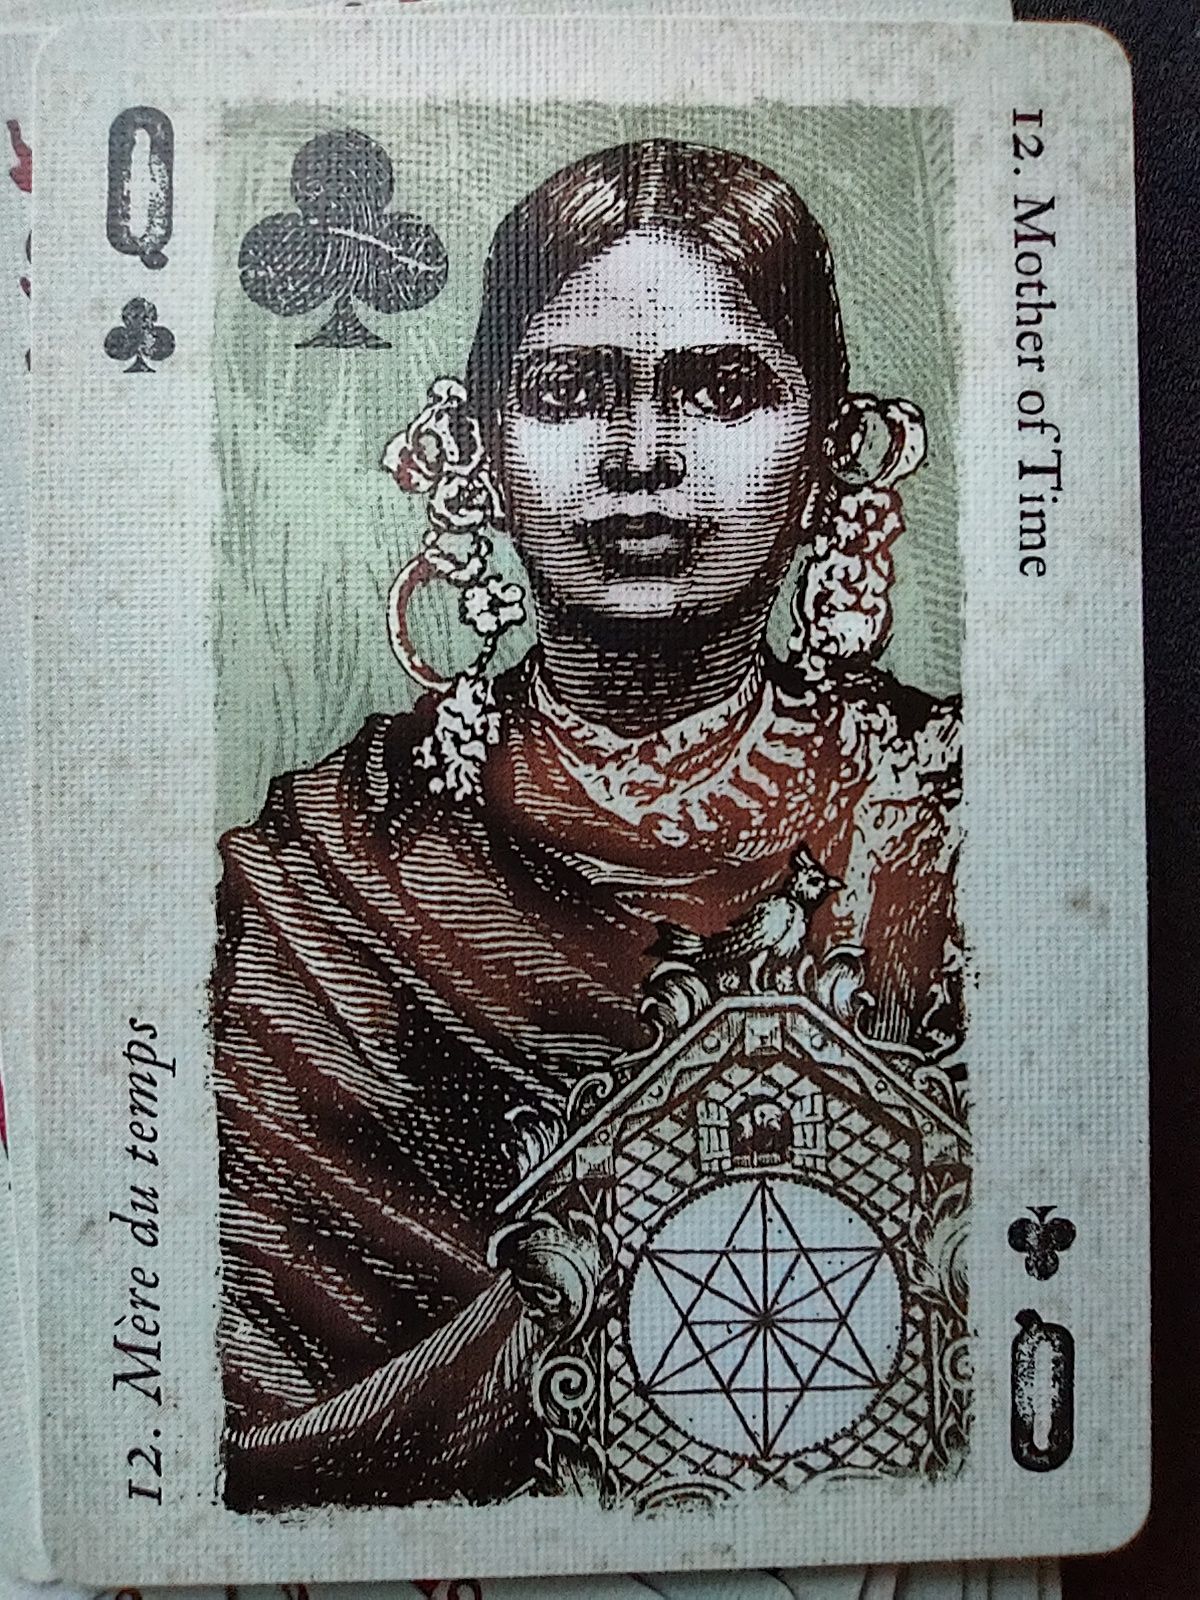 Queen of clubs. From the Cartomancer Duality (light) deck by Alain Benoit.